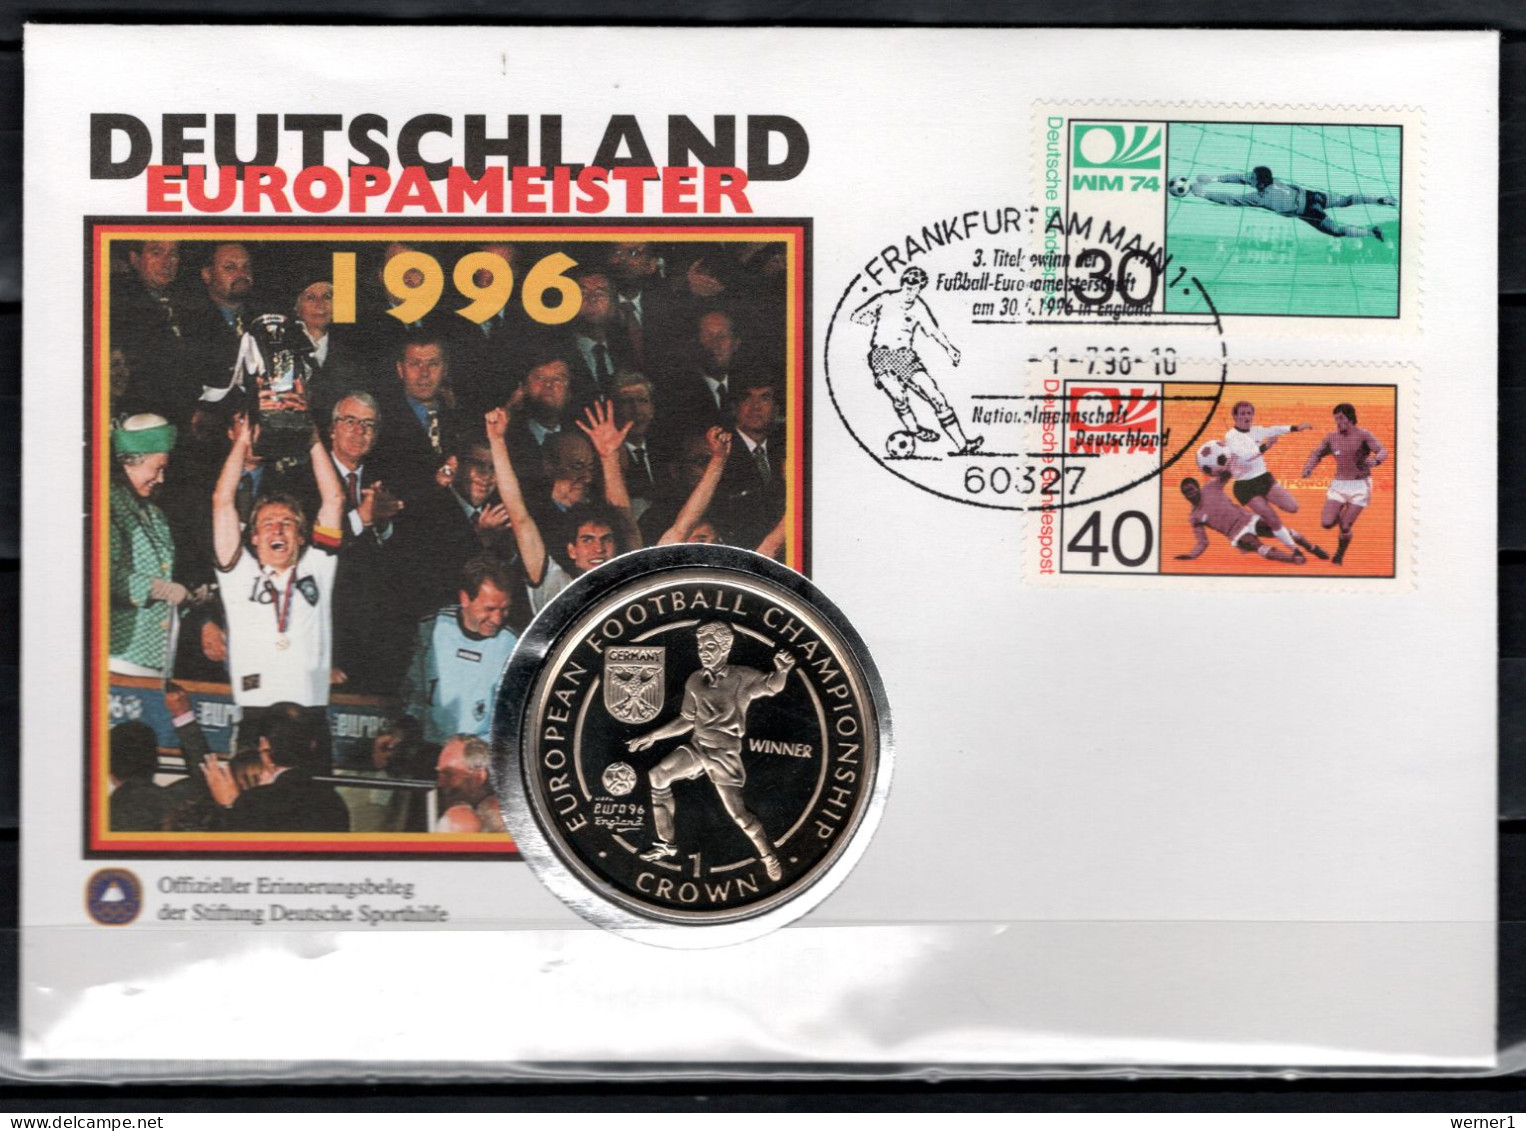 Germany 1996 Football Soccer European Championship Com. Numismatic Cover With 1 Crown Coin From Isle Of Man - Europei Di Calcio (UEFA)